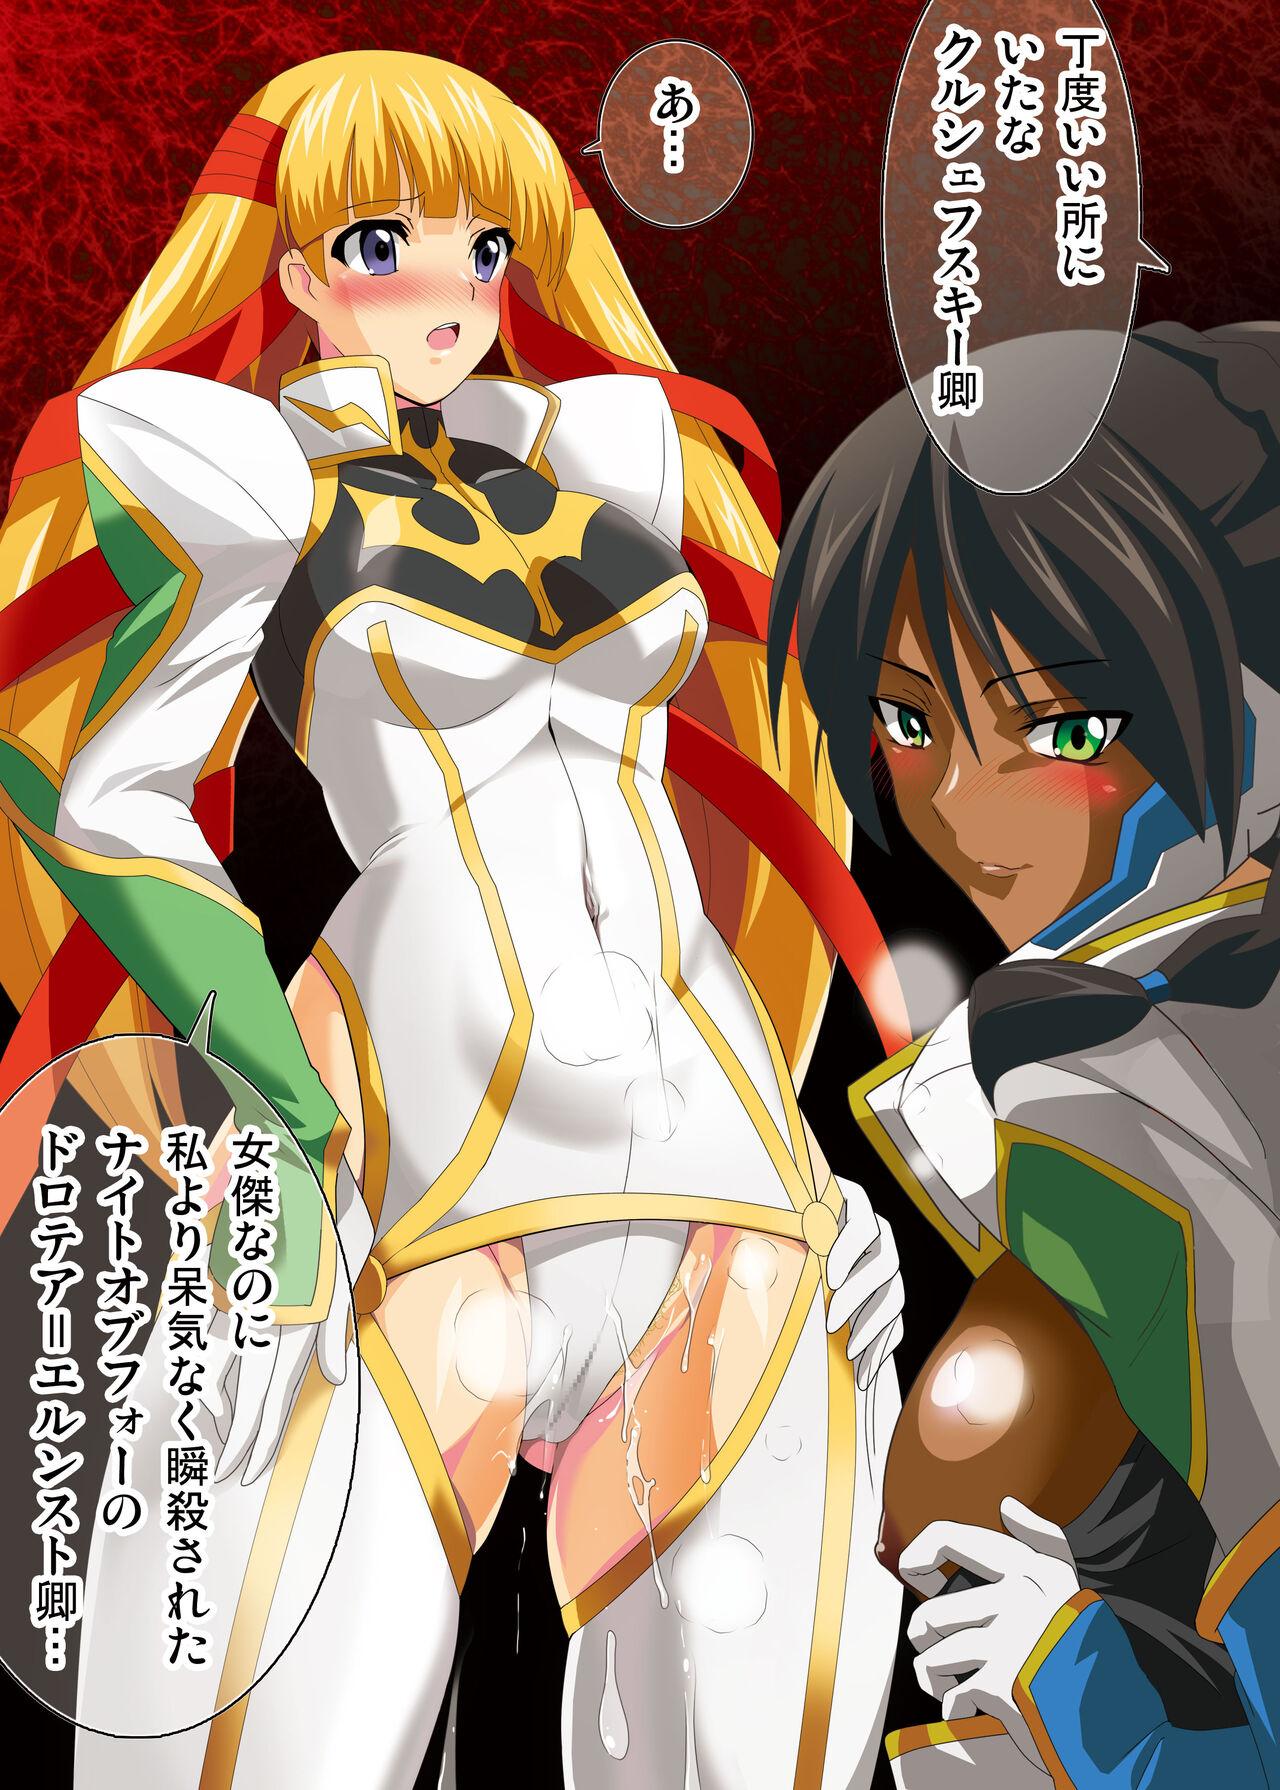 [Lezmoe! (Oyu no Kaori)]   [Brainwashing] Geass heroines completely corrupted by Empress Marianne [Evil fall] ~Knights, princesses, soldiers, and witches fall! (CODE GEASS: Lelouch of the Rebellion) 37